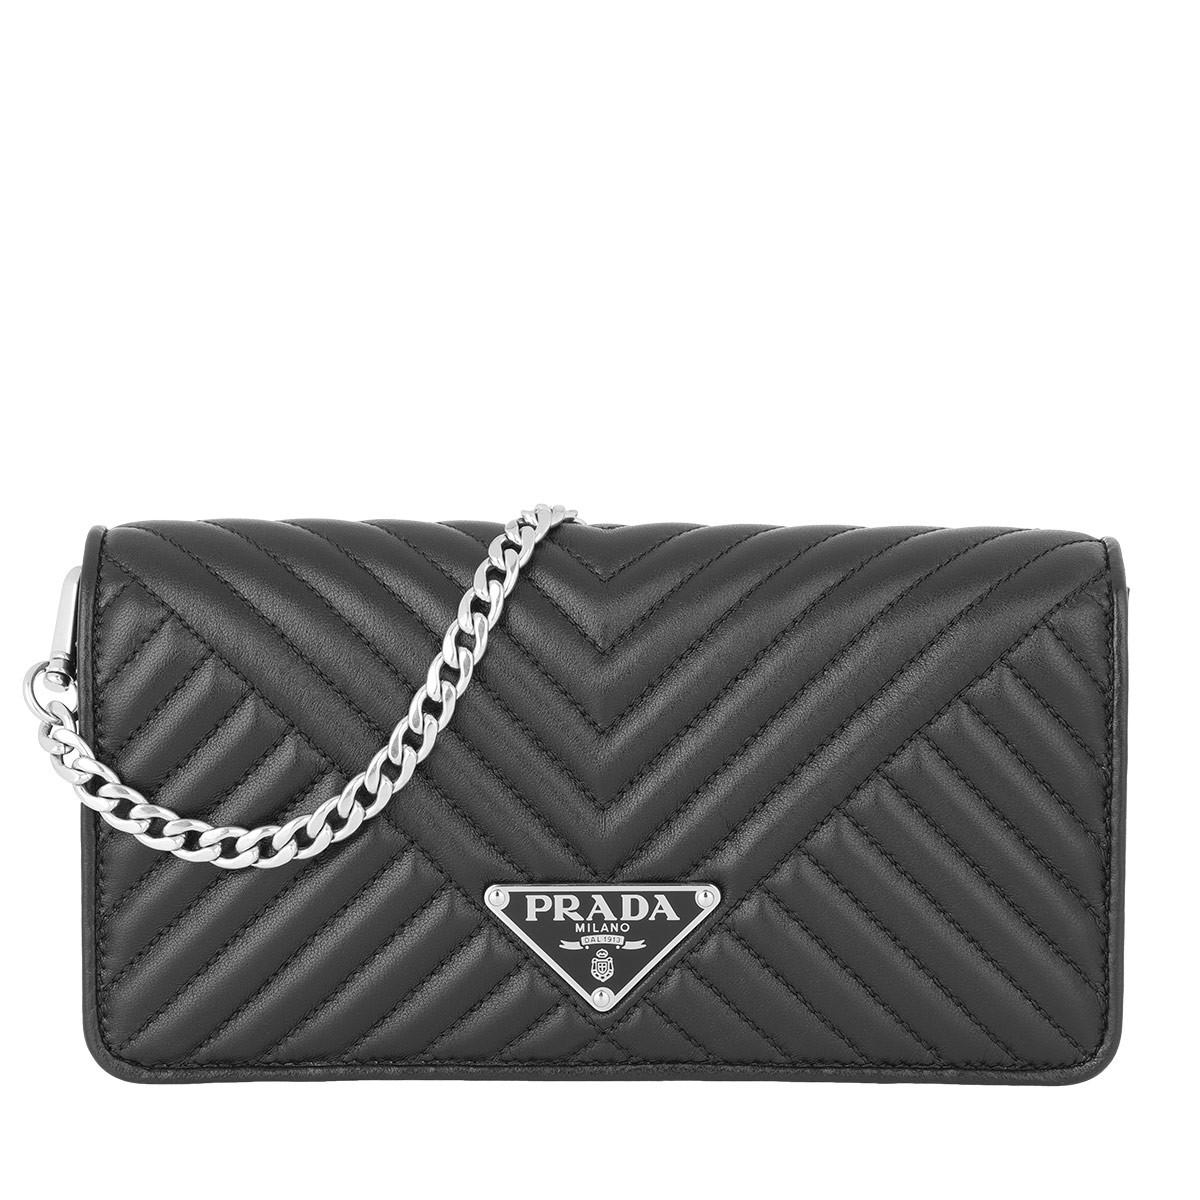 Prada - Women's Quilted Nappa Shoulder Bag - White - Leather